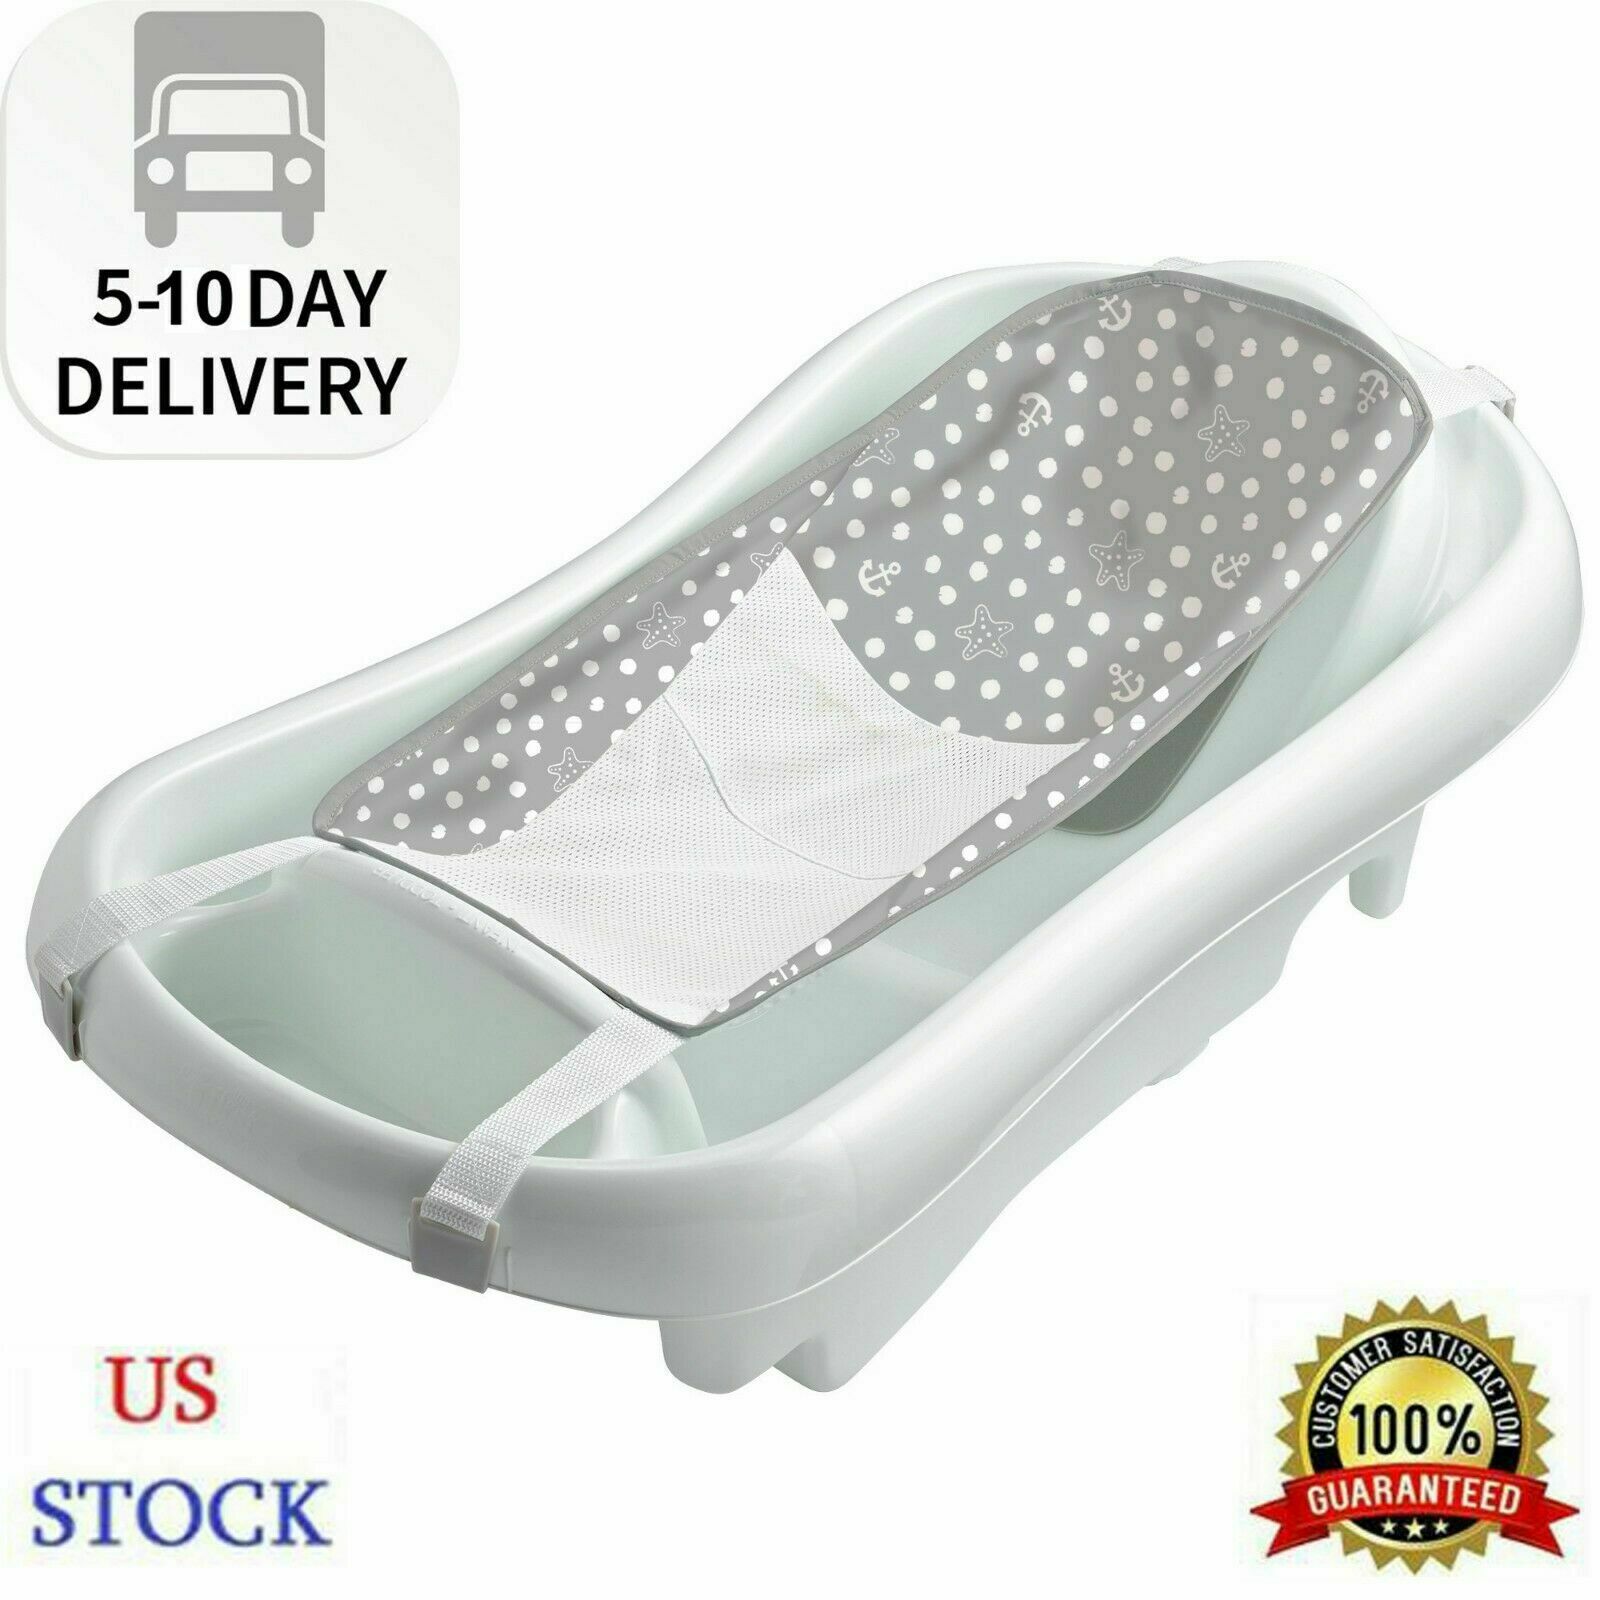 The First Years Sure Comfort Newborn To Toddler Tub, White Fast Shipping Us